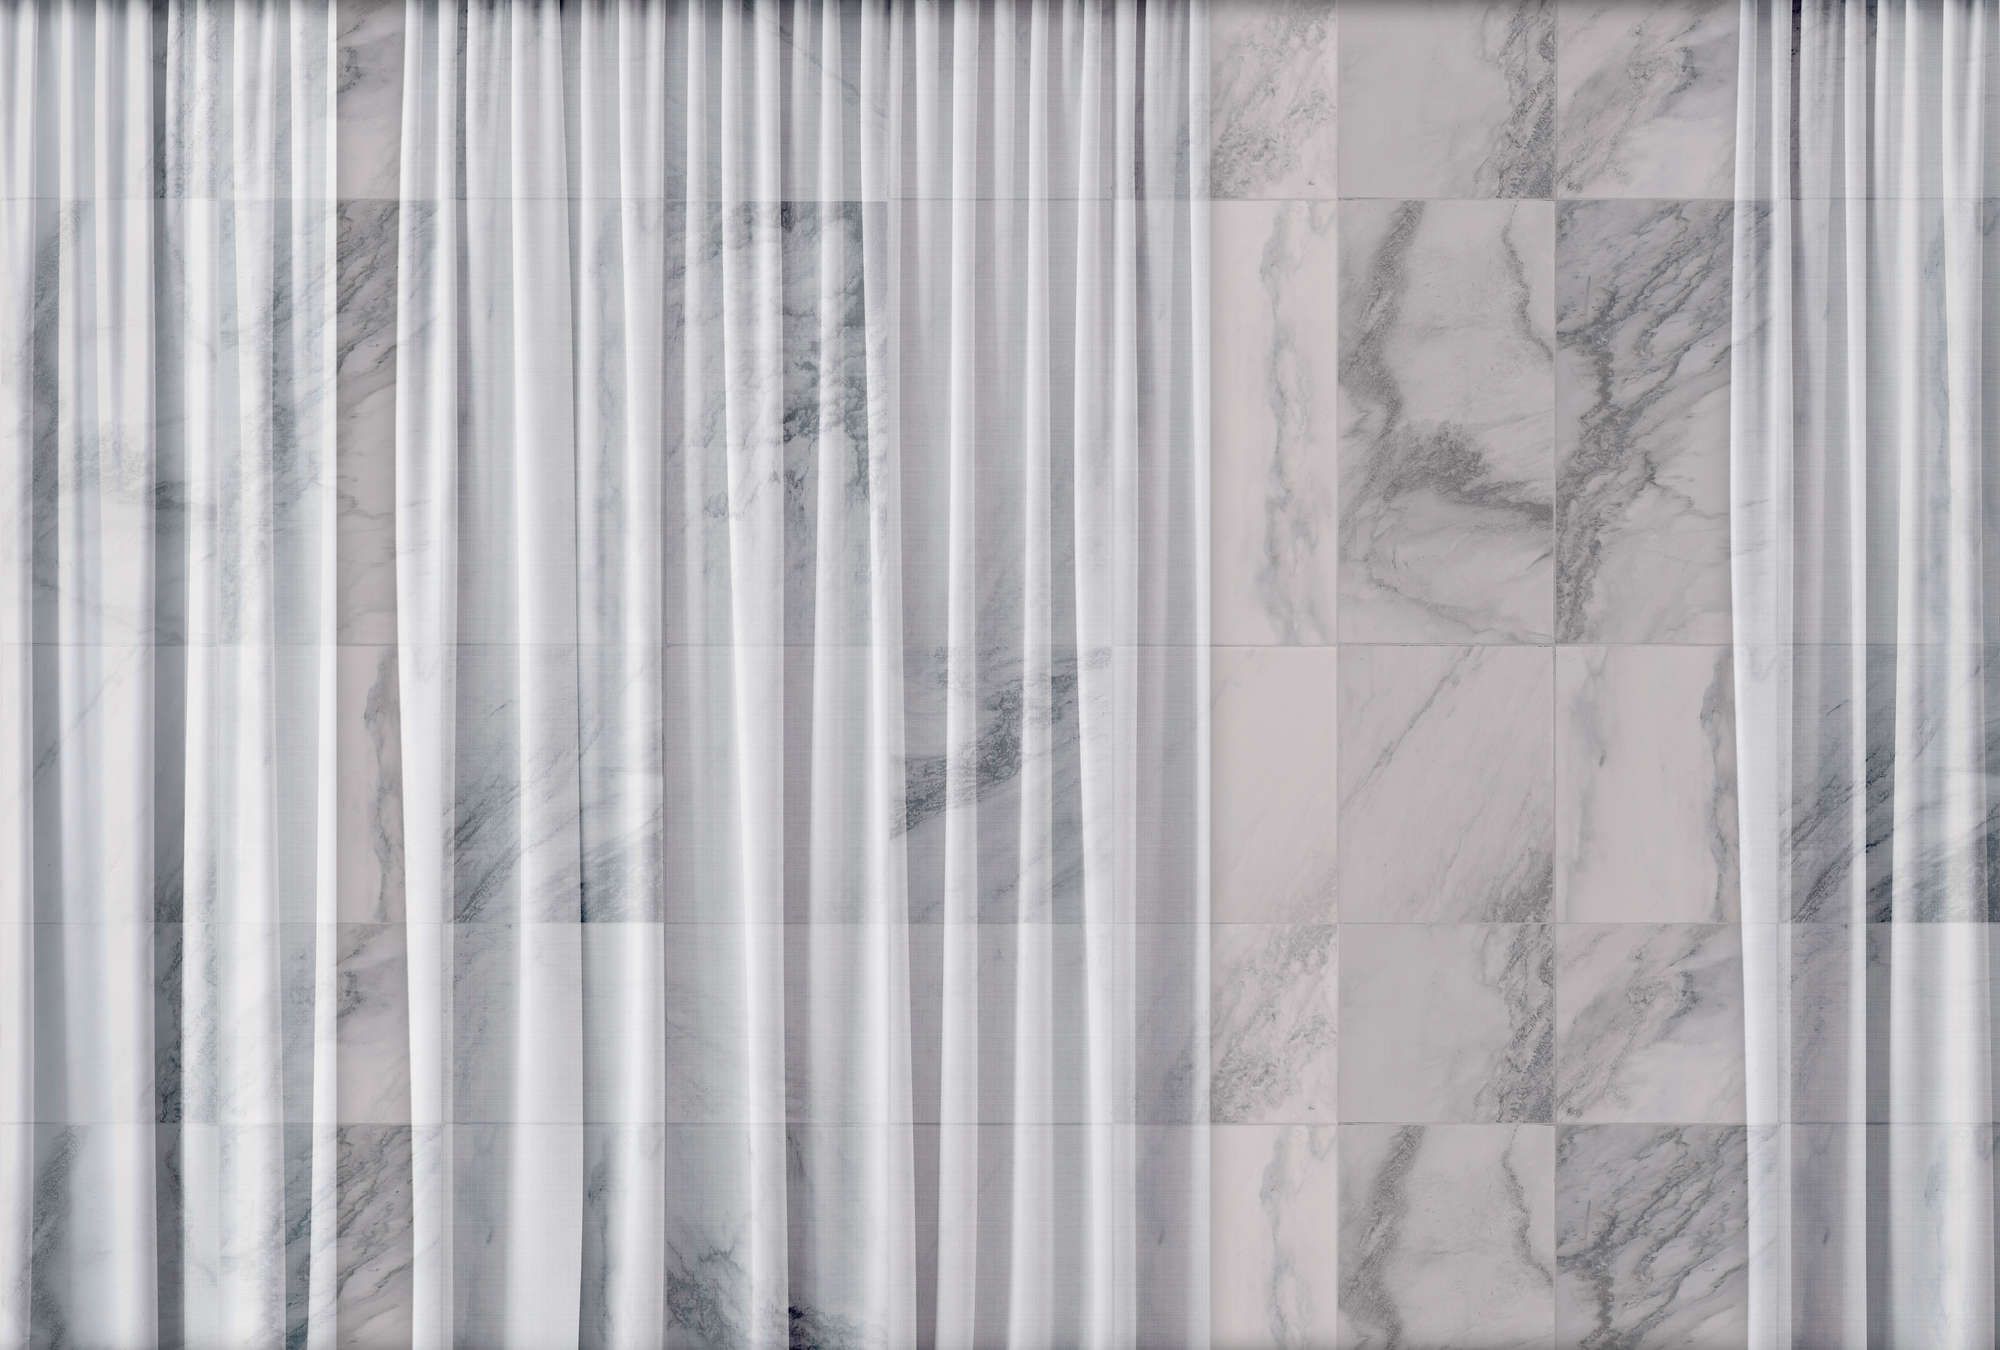             Photo wallpaper »nova 1« - Subtle falling white curtain in front of a marble wall - Smooth, slightly pearlescent non-woven fabric
        